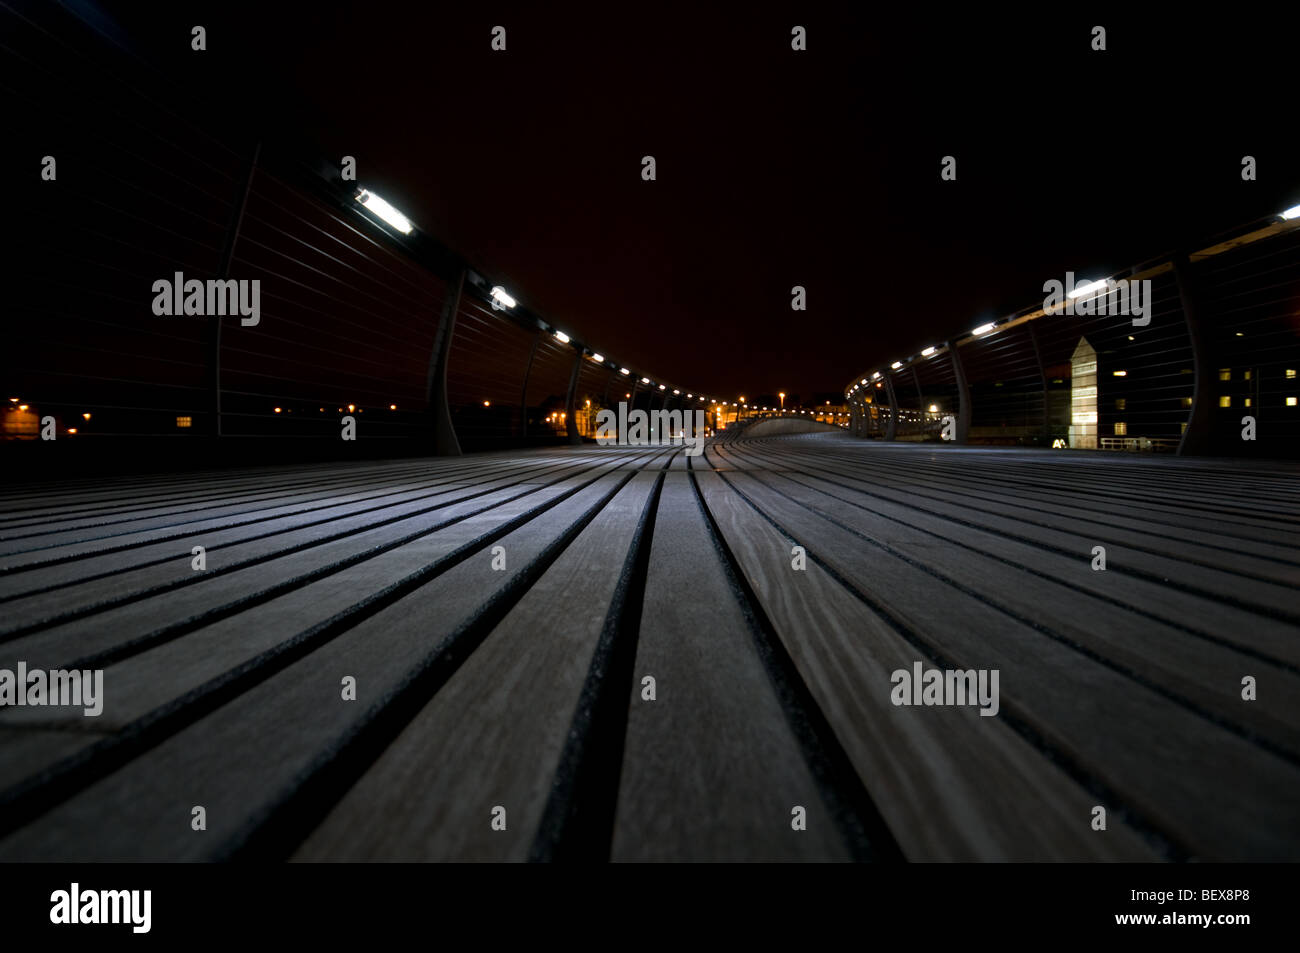 A photo showing the floor of the Castleford footbridge at night Stock Photo